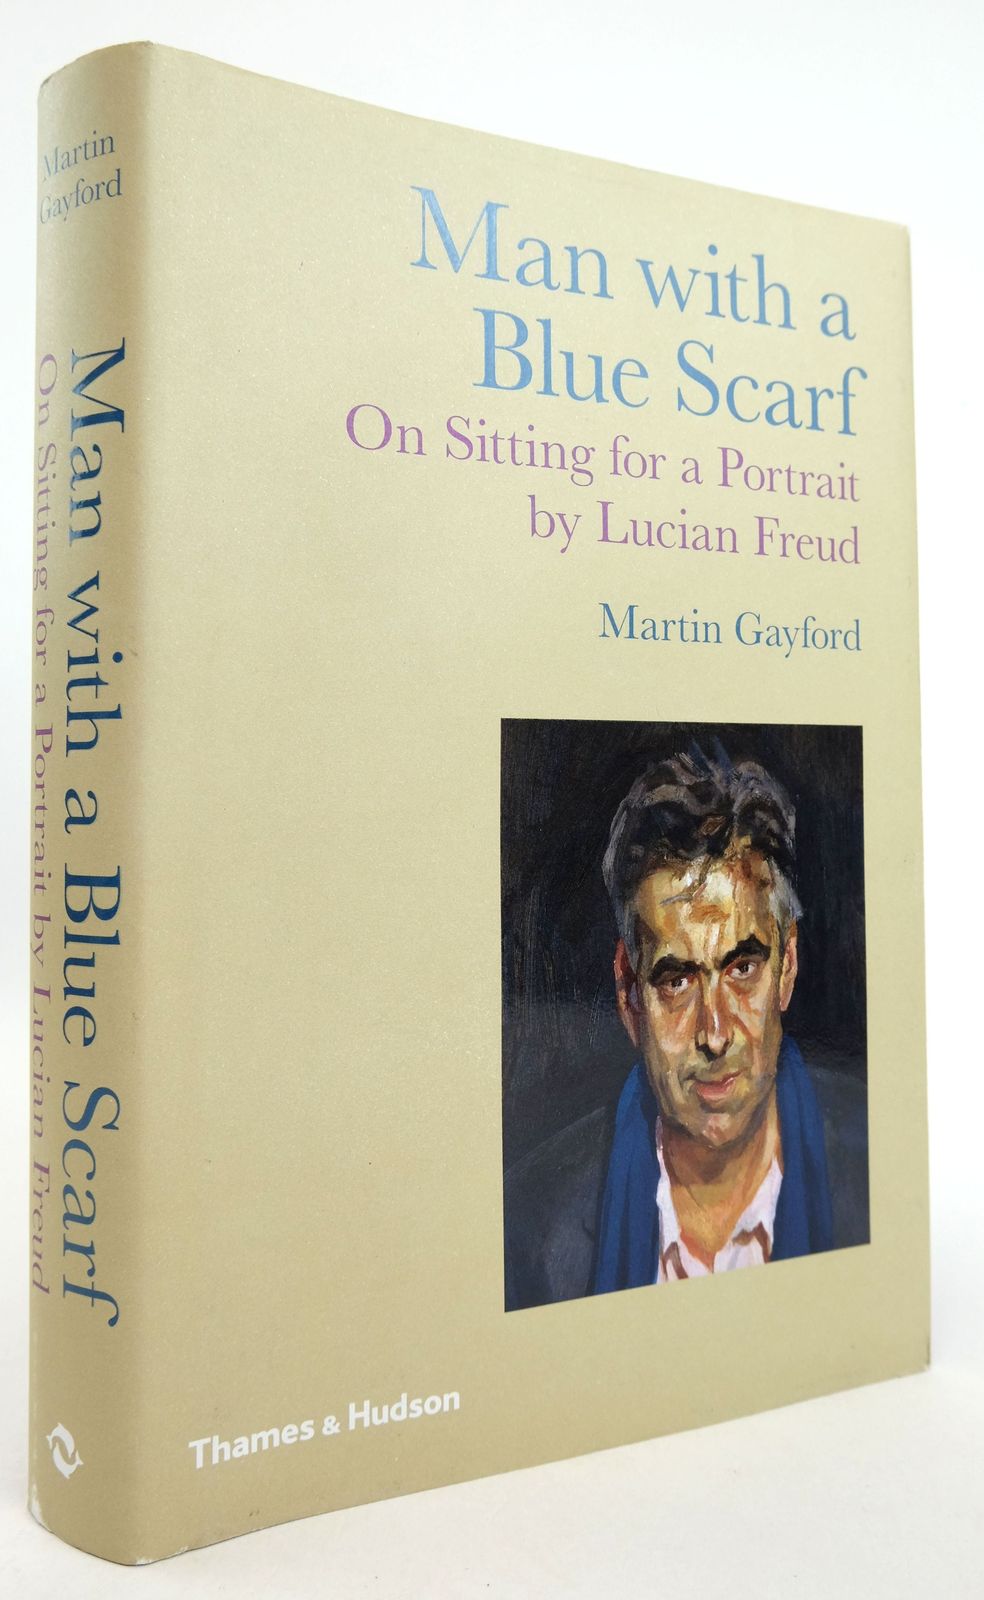 Photo of MAN WITH A BLUE SCARF: ON SITTING FOR A PORTRAIT BY LUCIAN FREUD written by Gayford, Martin illustrated by Freud, Lucian published by Thames and Hudson (STOCK CODE: 1819311)  for sale by Stella & Rose's Books